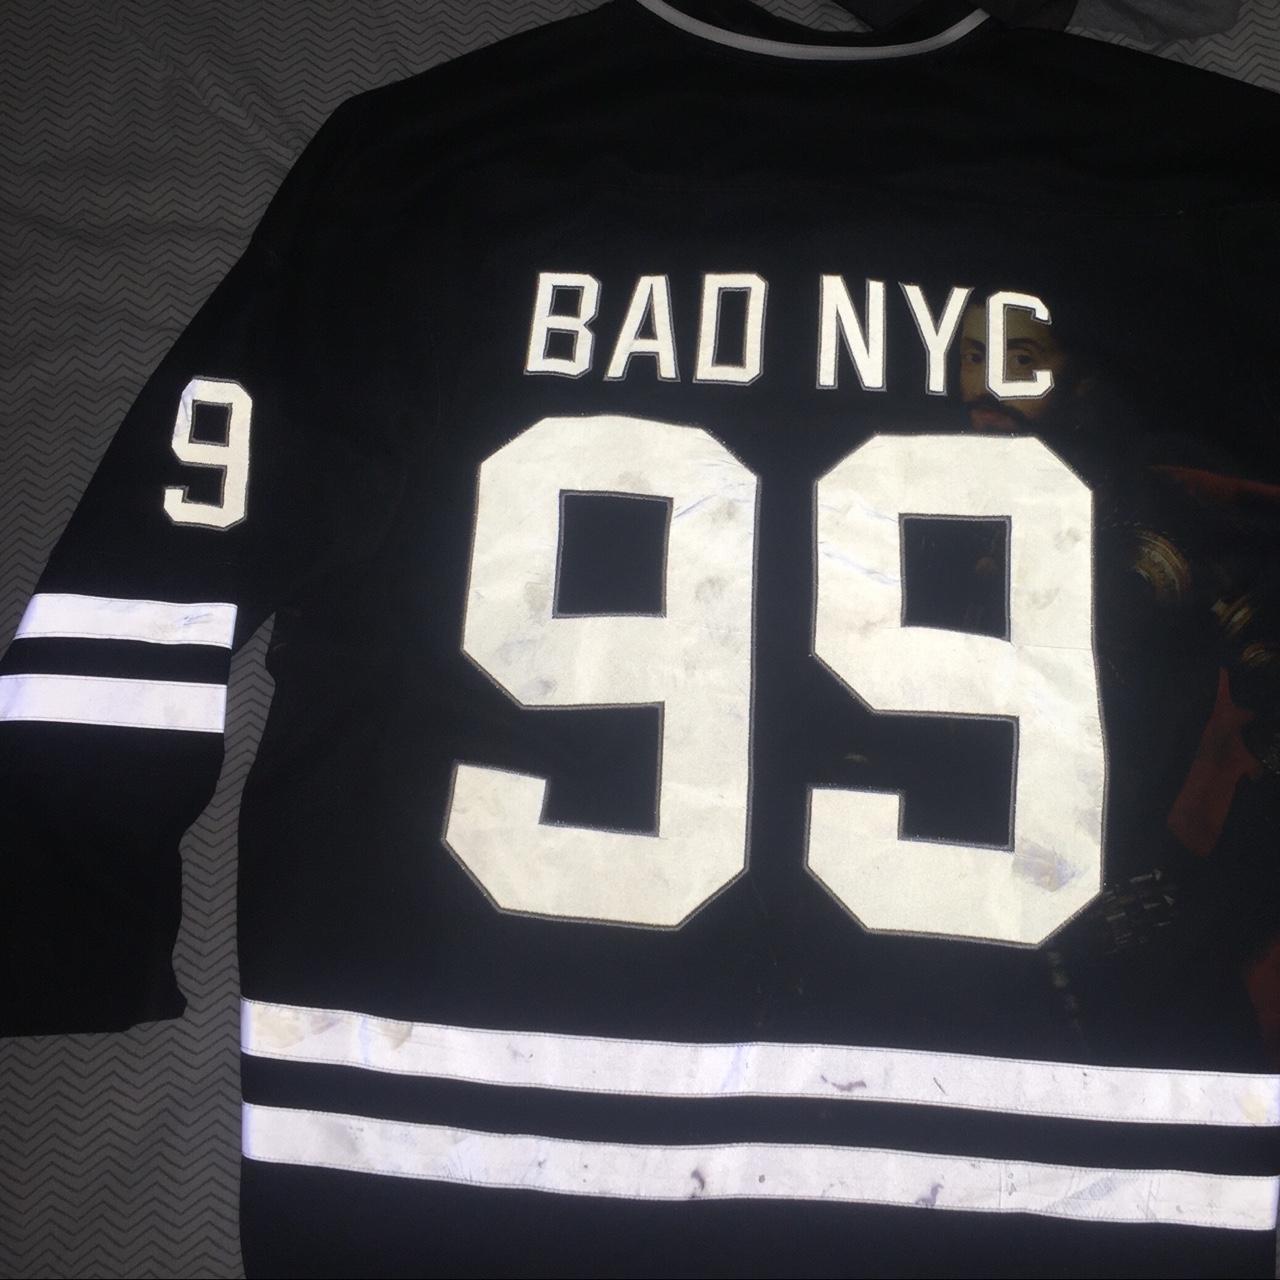 Bad Bunch NYC jersey sold out in seconds, Joey Bad - Depop